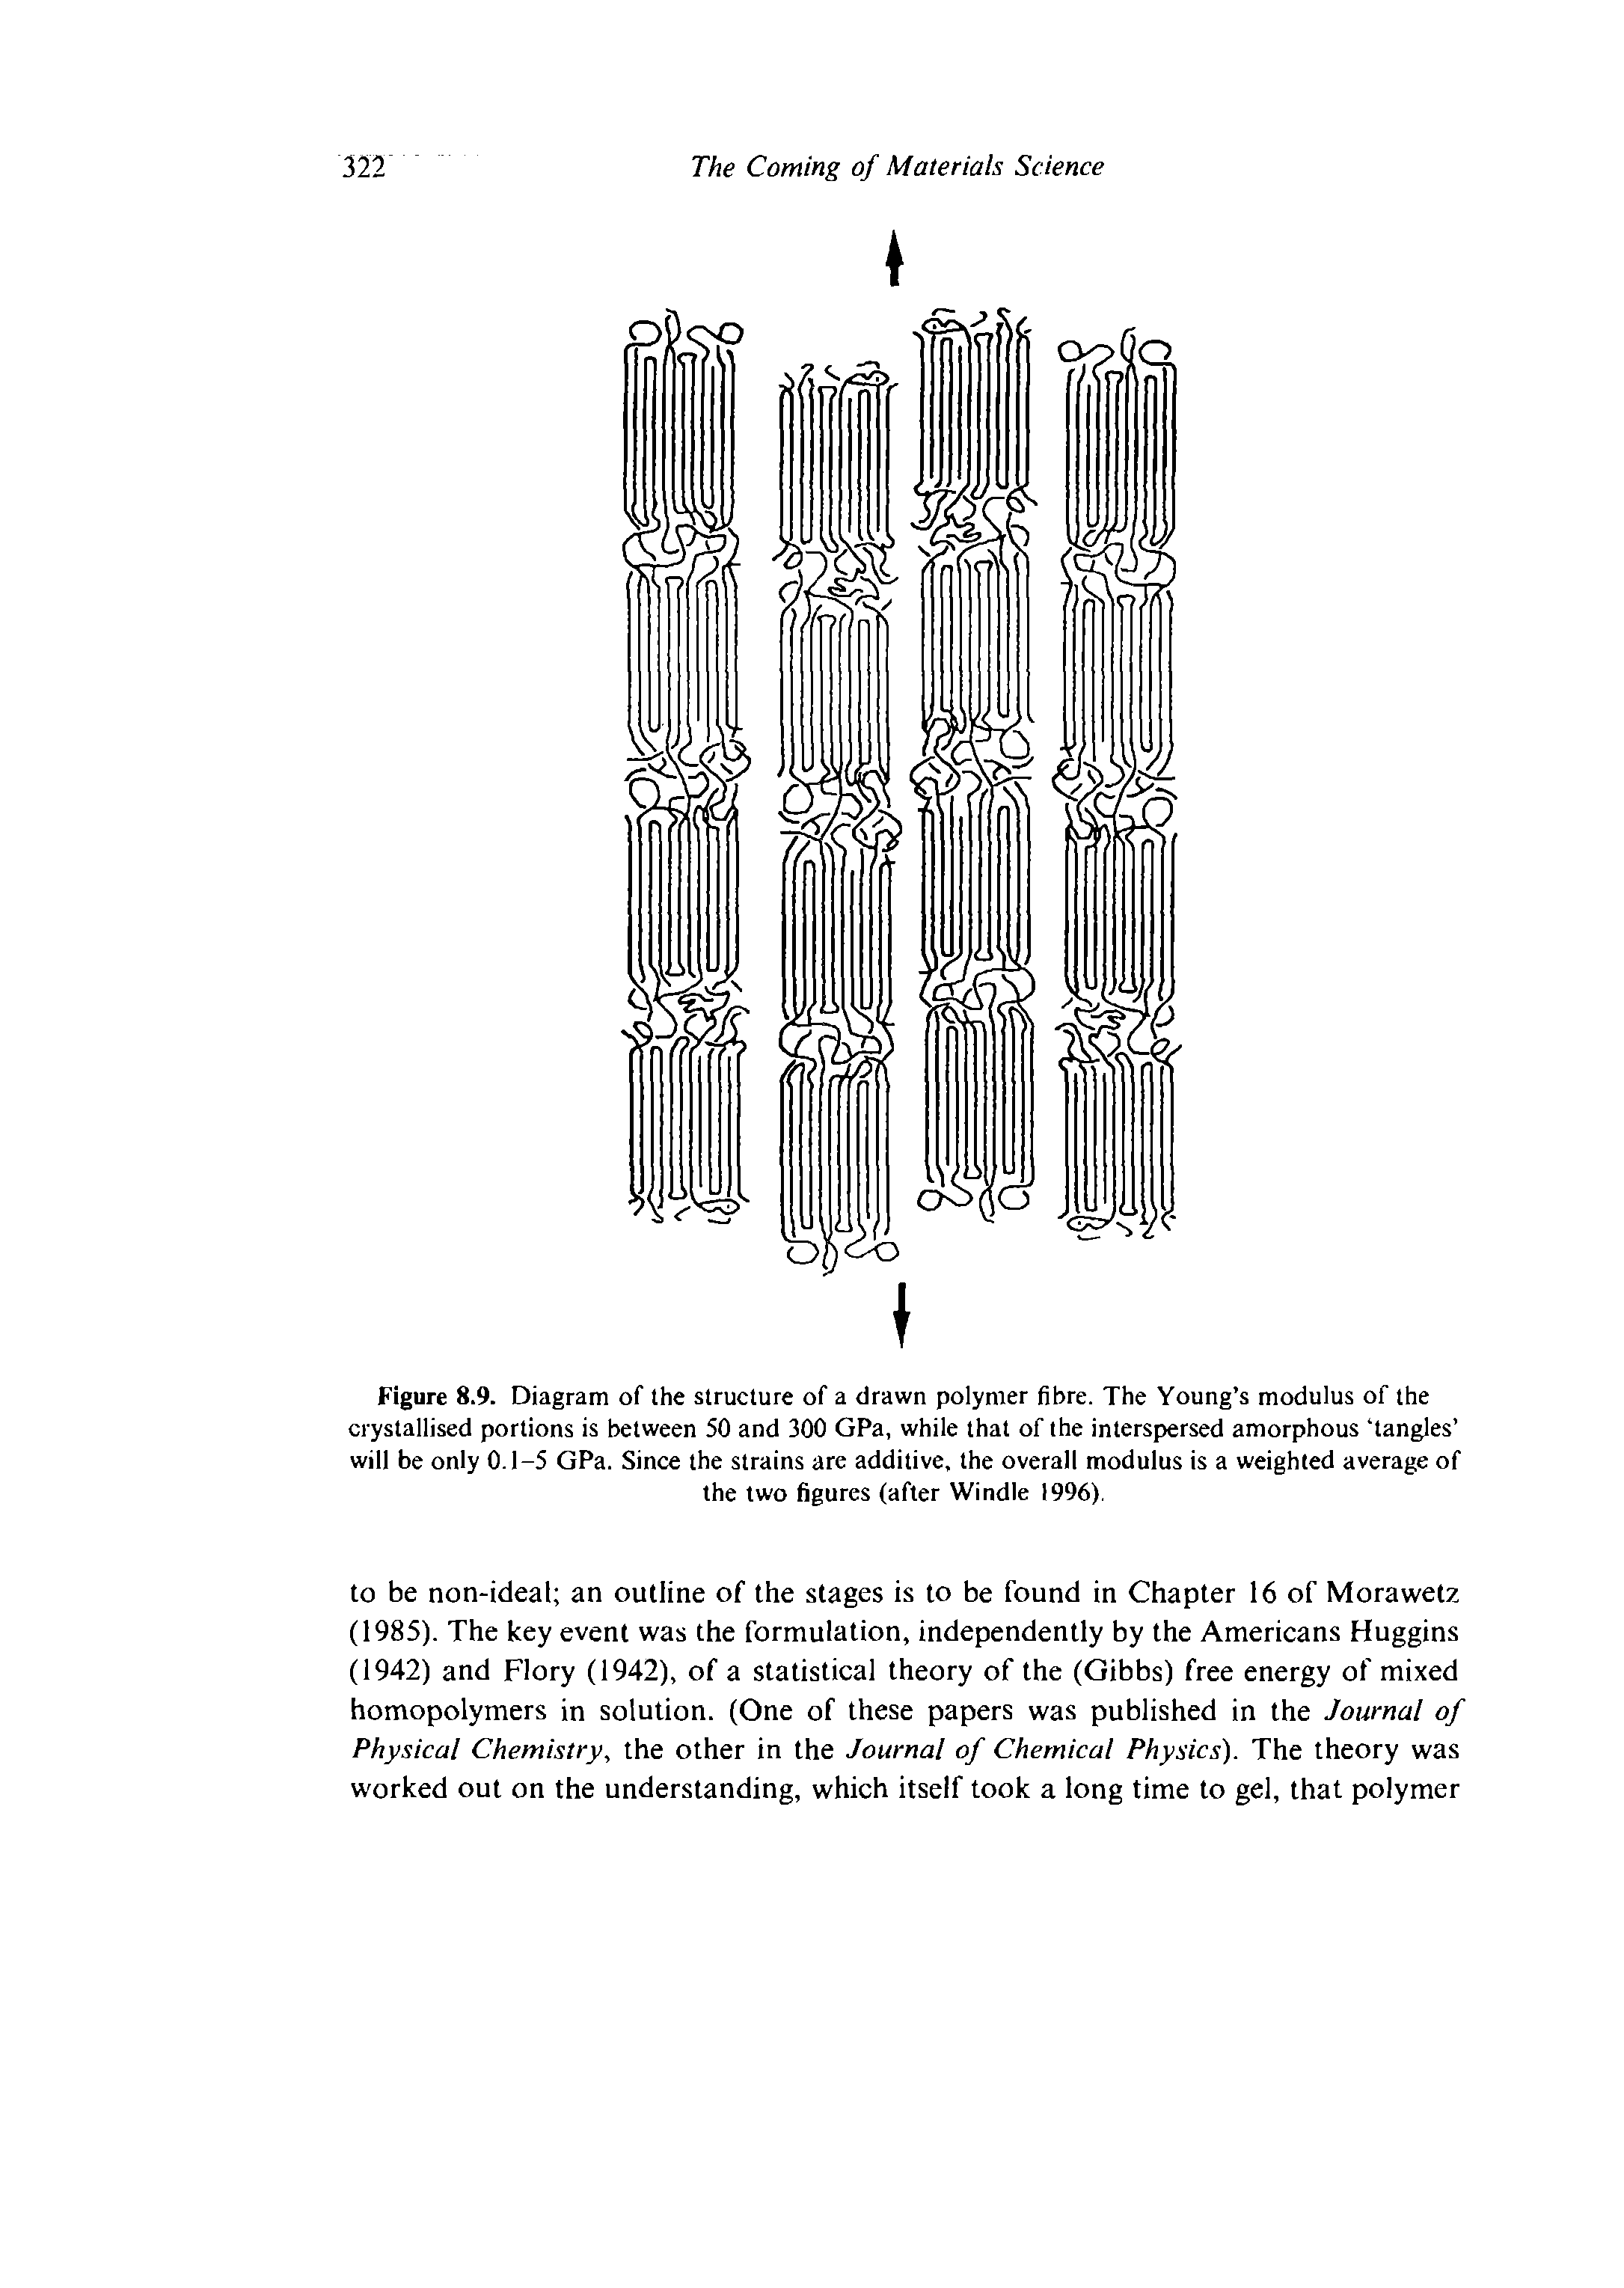 Figure 8.9. Diagram of the structure of a drawn polymer fibre. The Young s modulus of the crystallised portions is between 50 and 300 GPa, while that of the interspersed amorphous tangles will be only 0.1-5 GPa. Since the strains are additive, the overall modulus is a weighted average of...